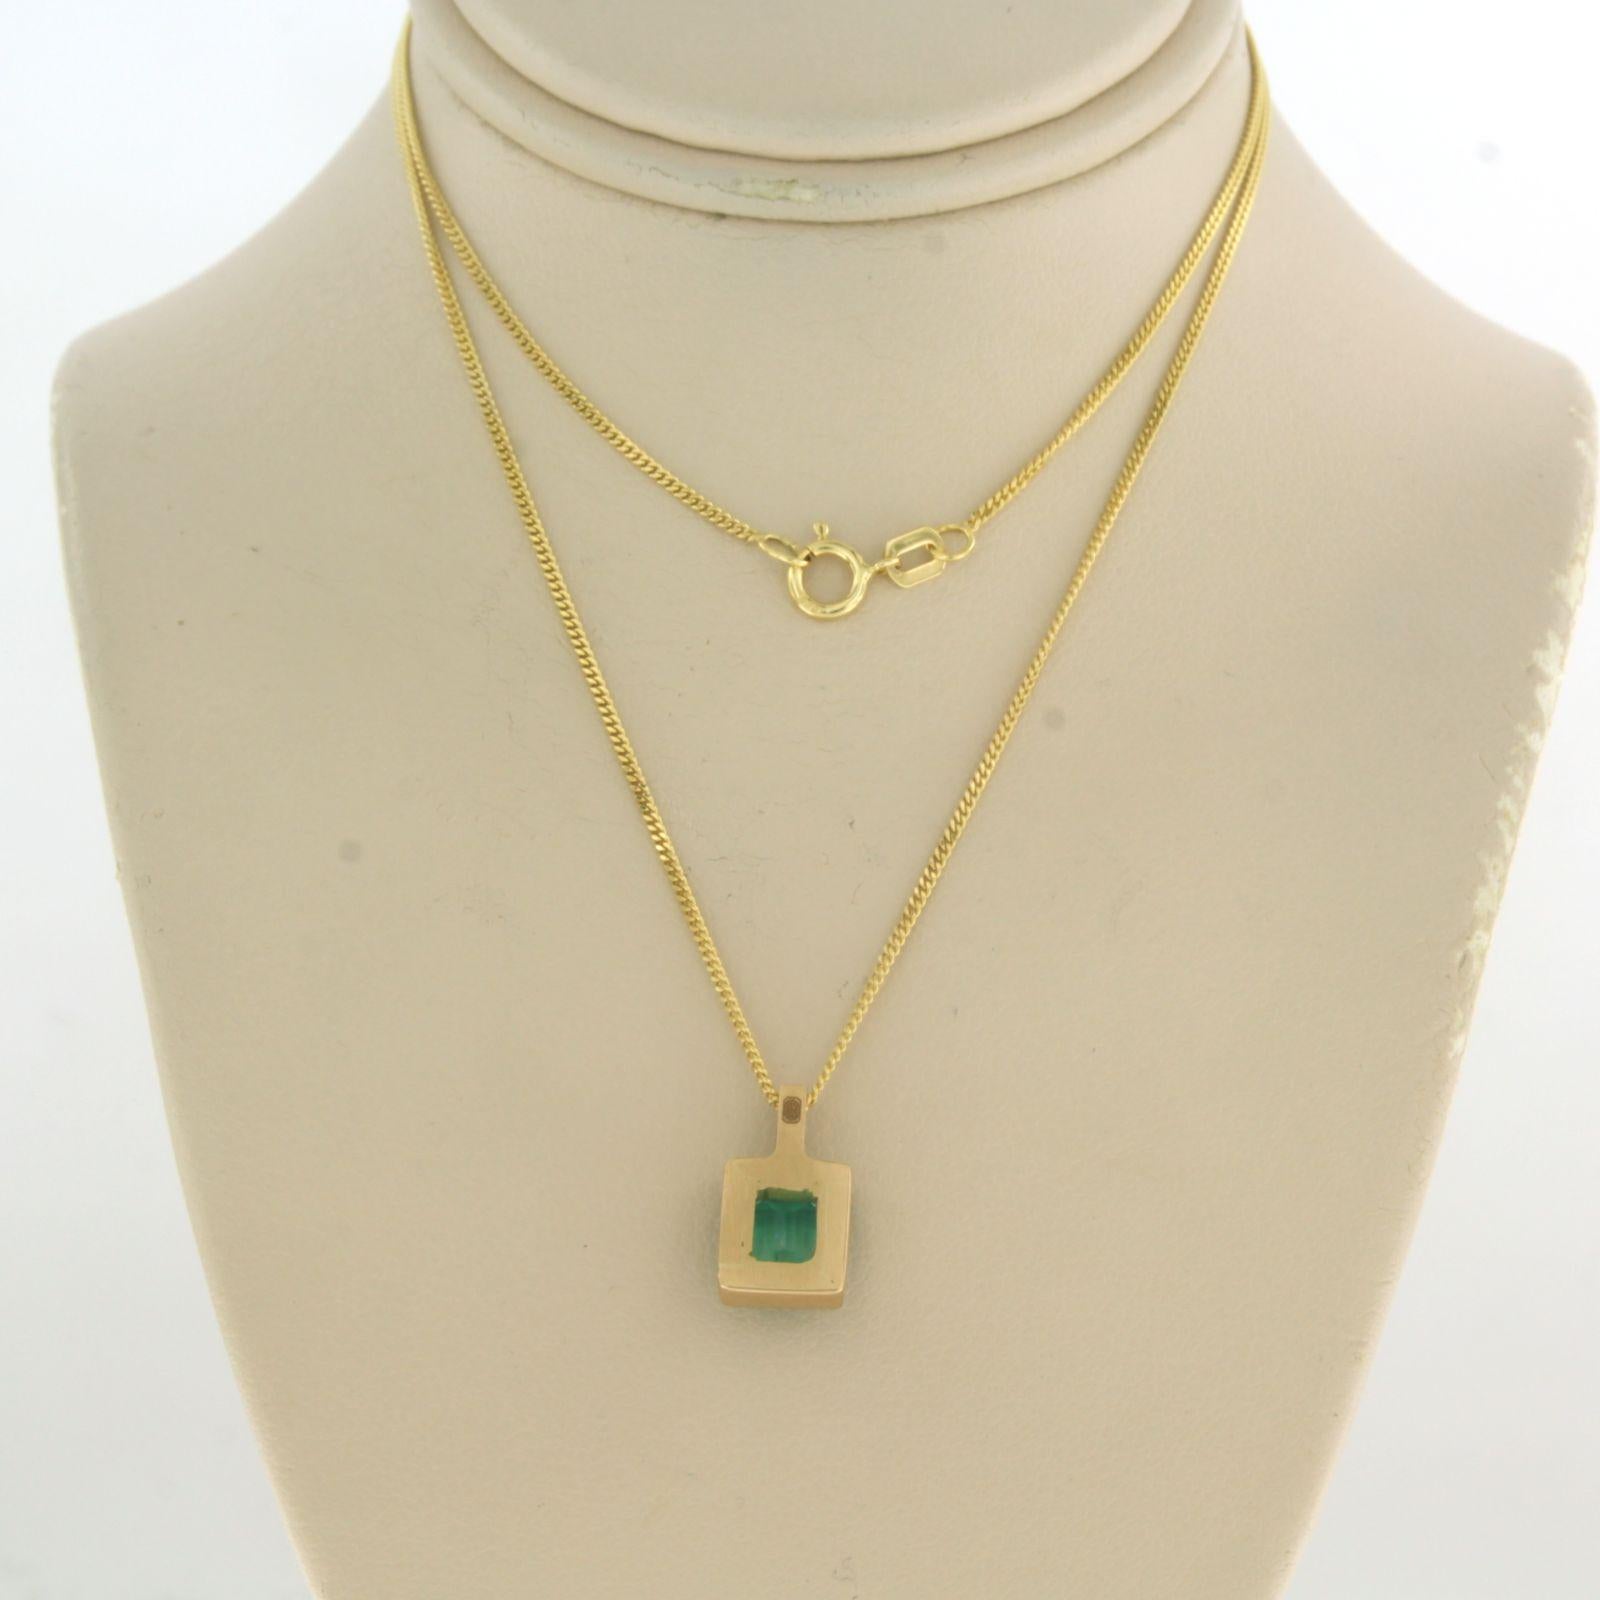 Women's Necklace with pendant set with emerald and diamond 14k yellow gold